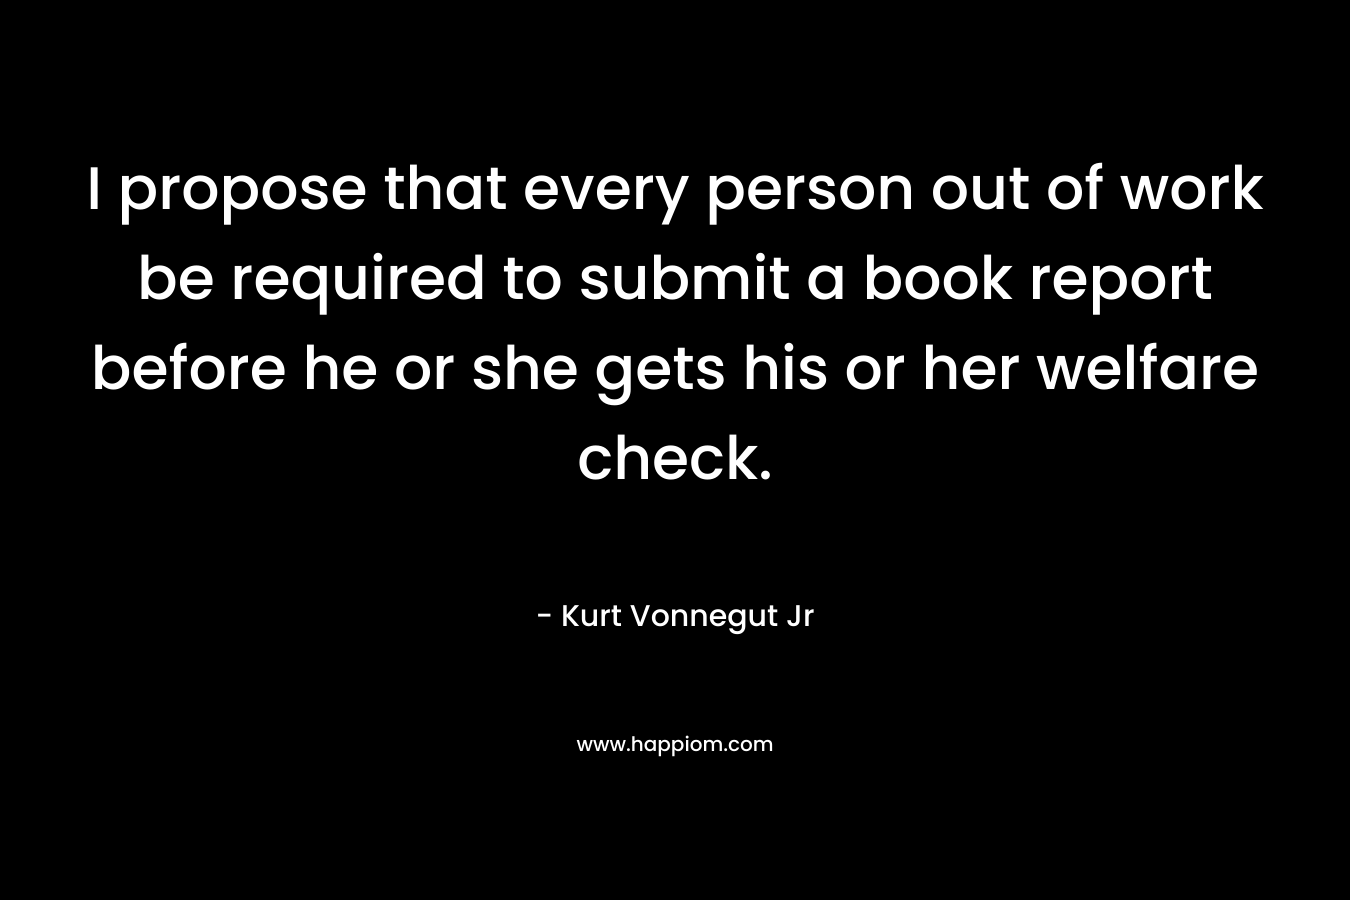 I propose that every person out of work be required to submit a book report before he or she gets his or her welfare check.